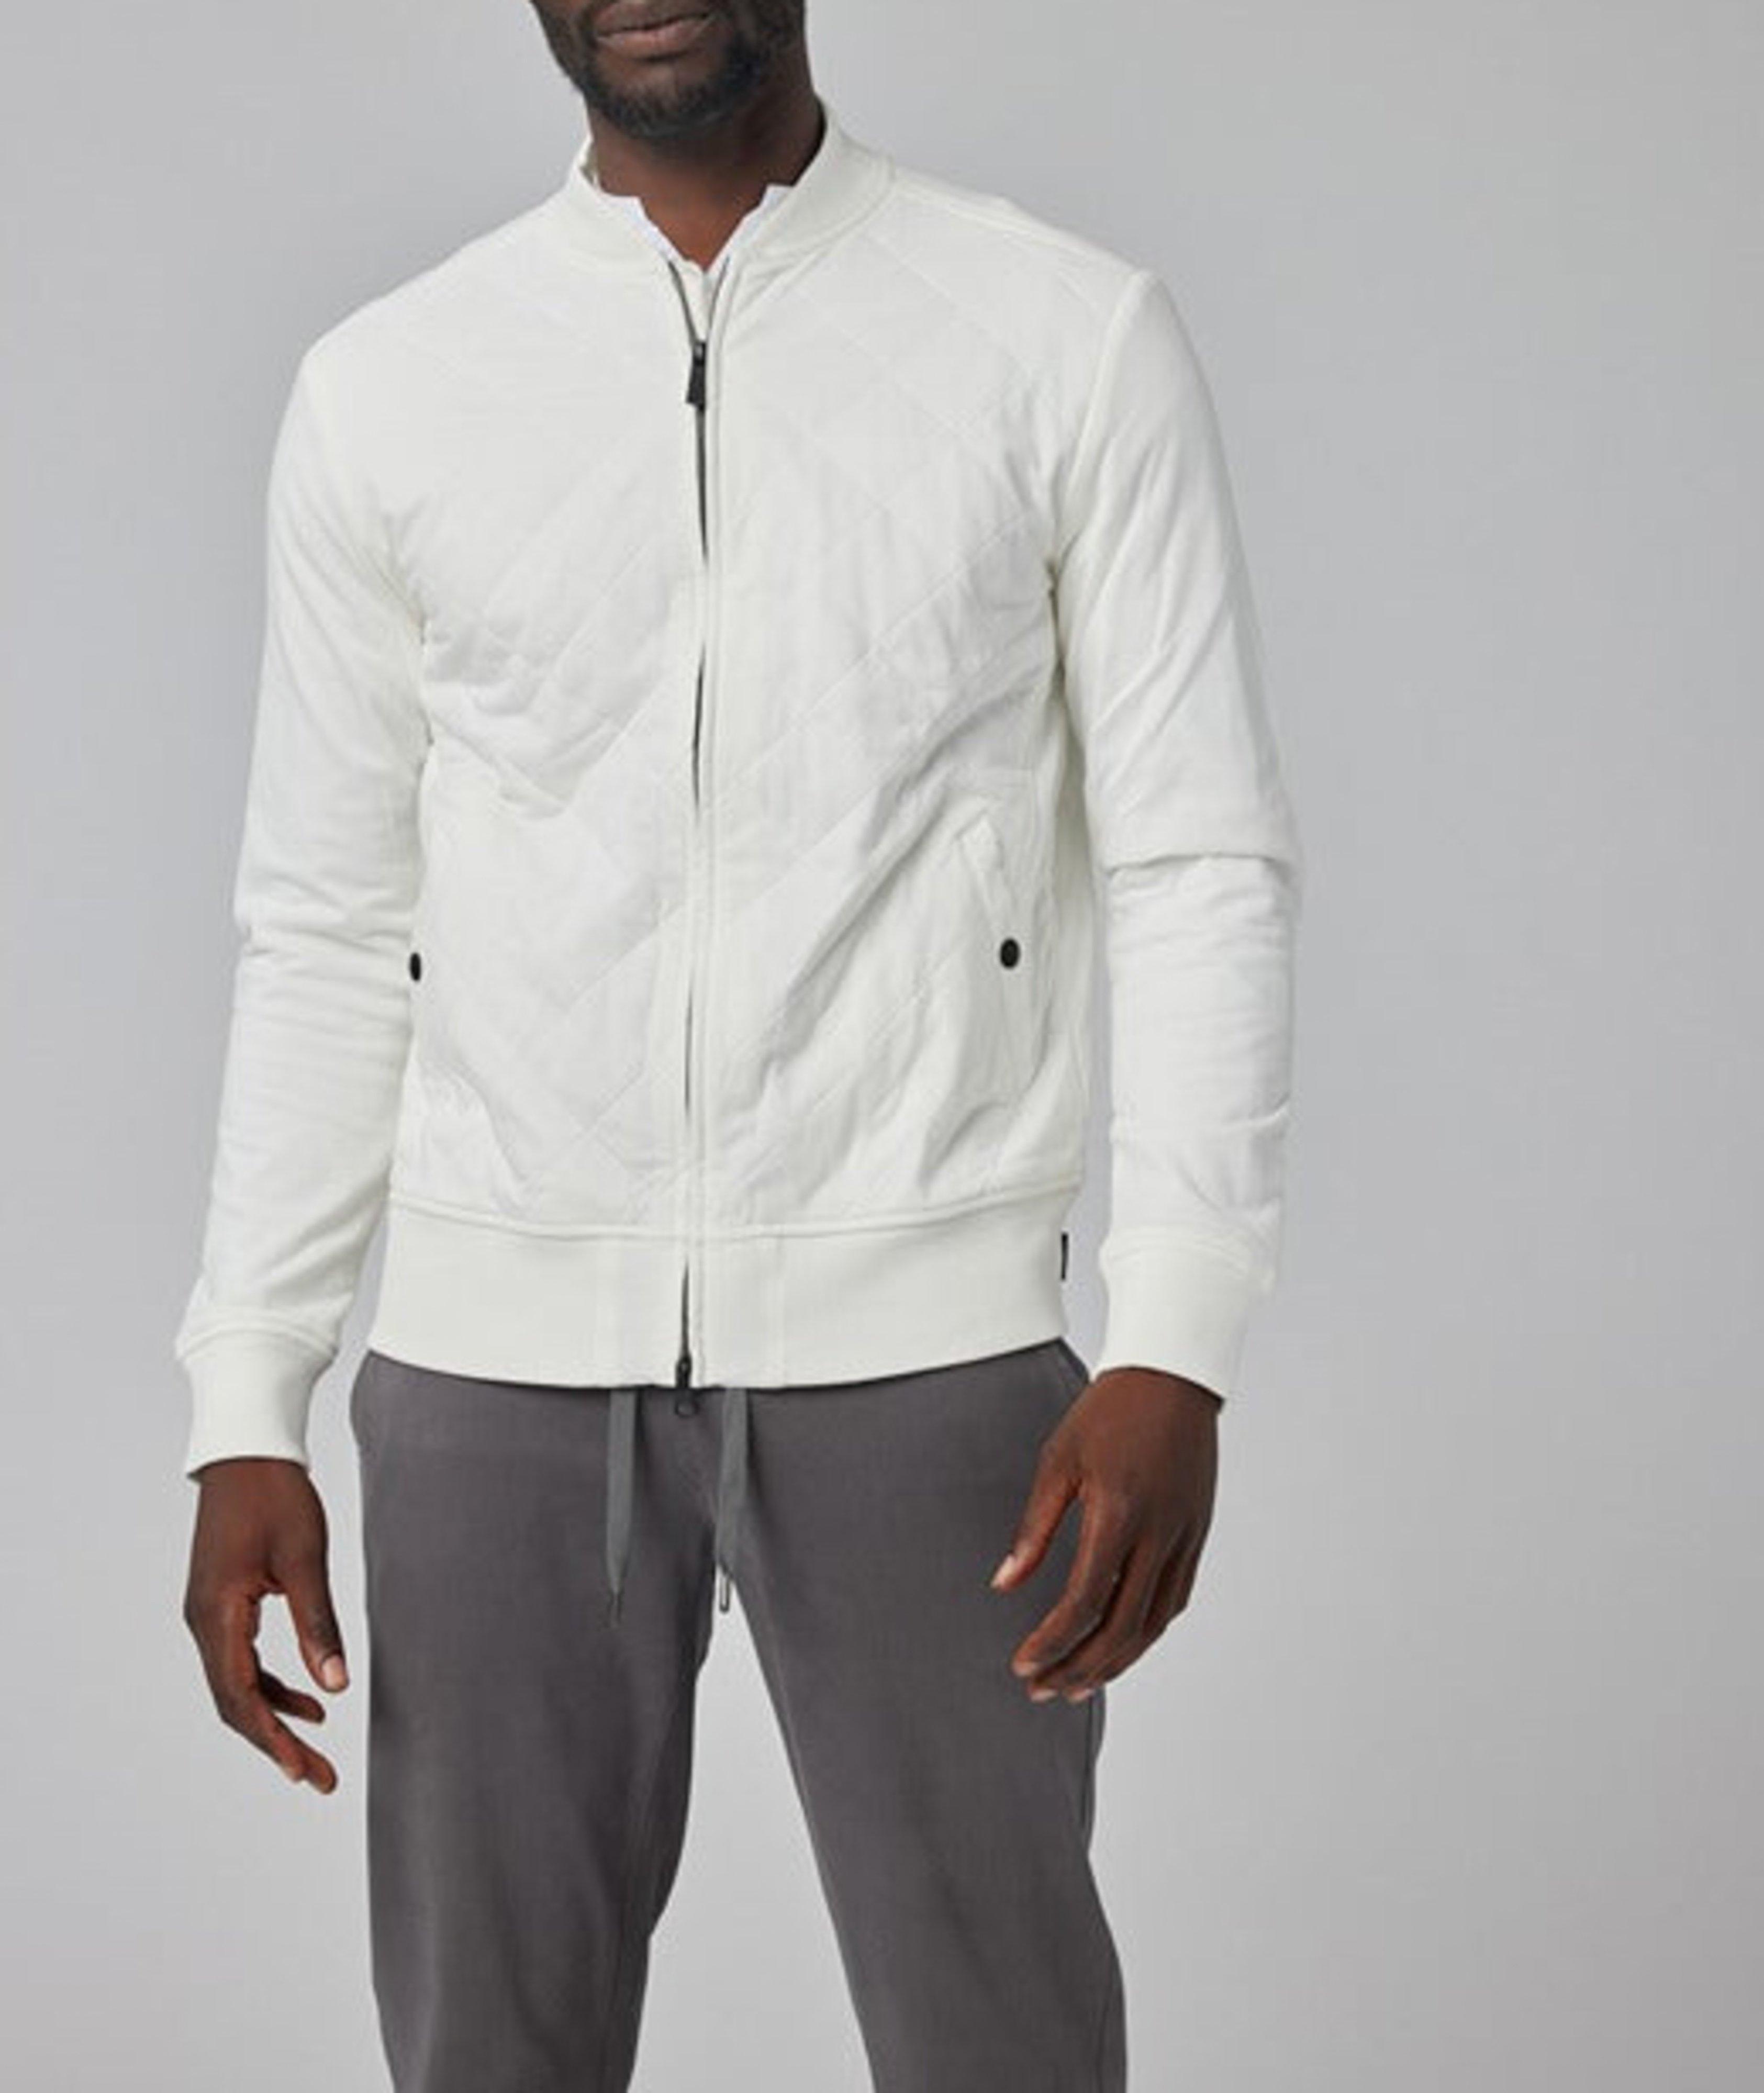 Qui;lted Premium Jersey Mayfair Bomber image 0